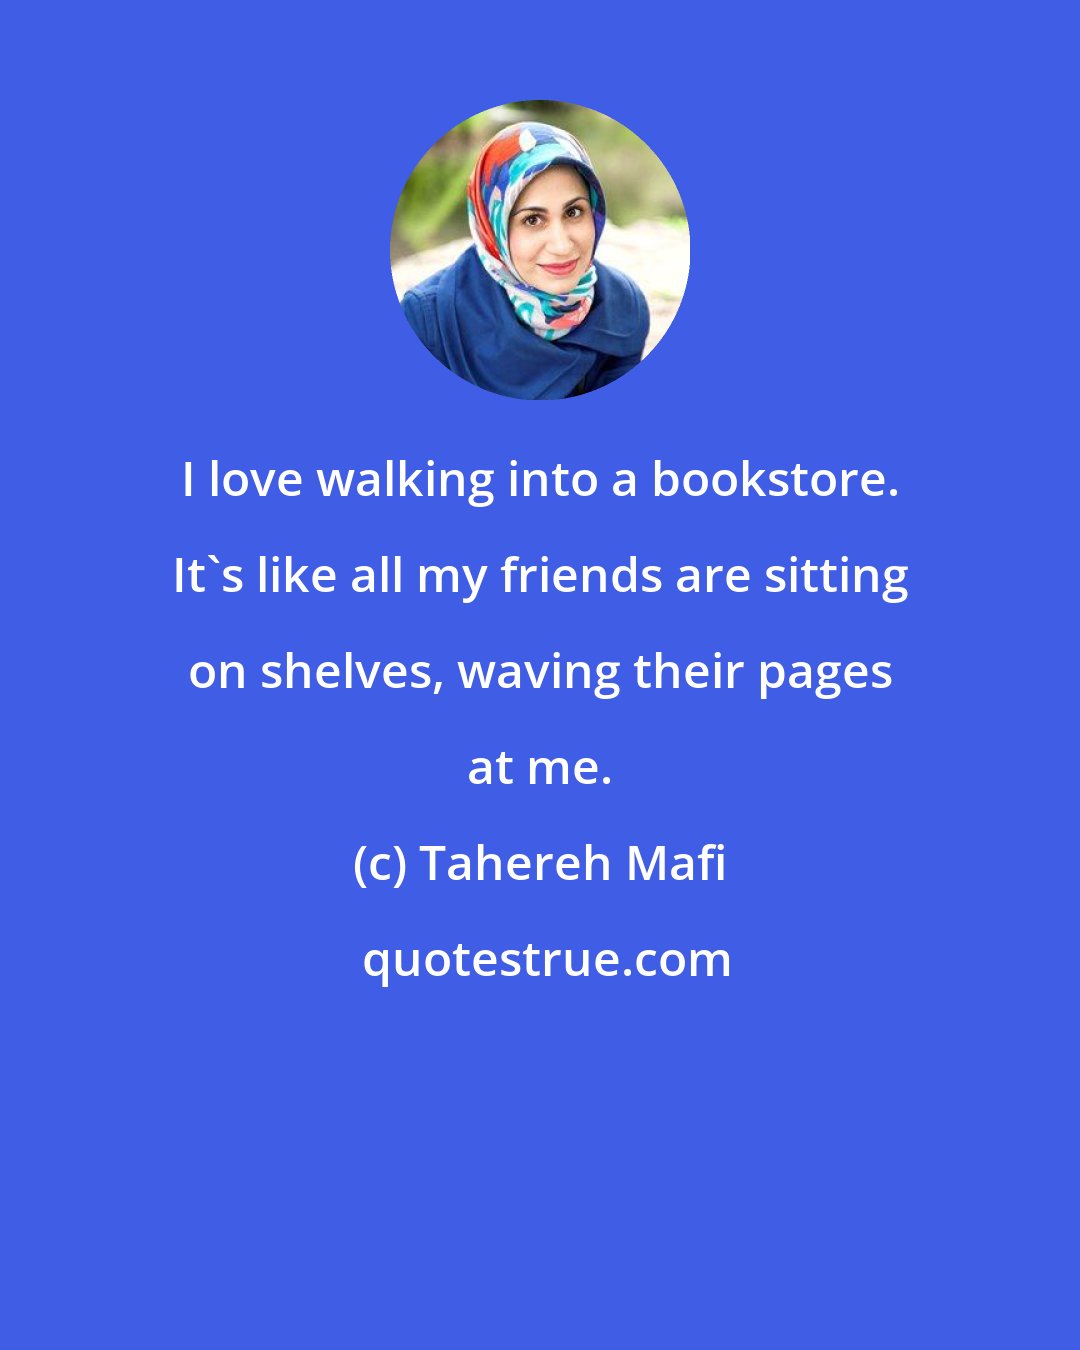 Tahereh Mafi: I love walking into a bookstore. It's like all my friends are sitting on shelves, waving their pages at me.